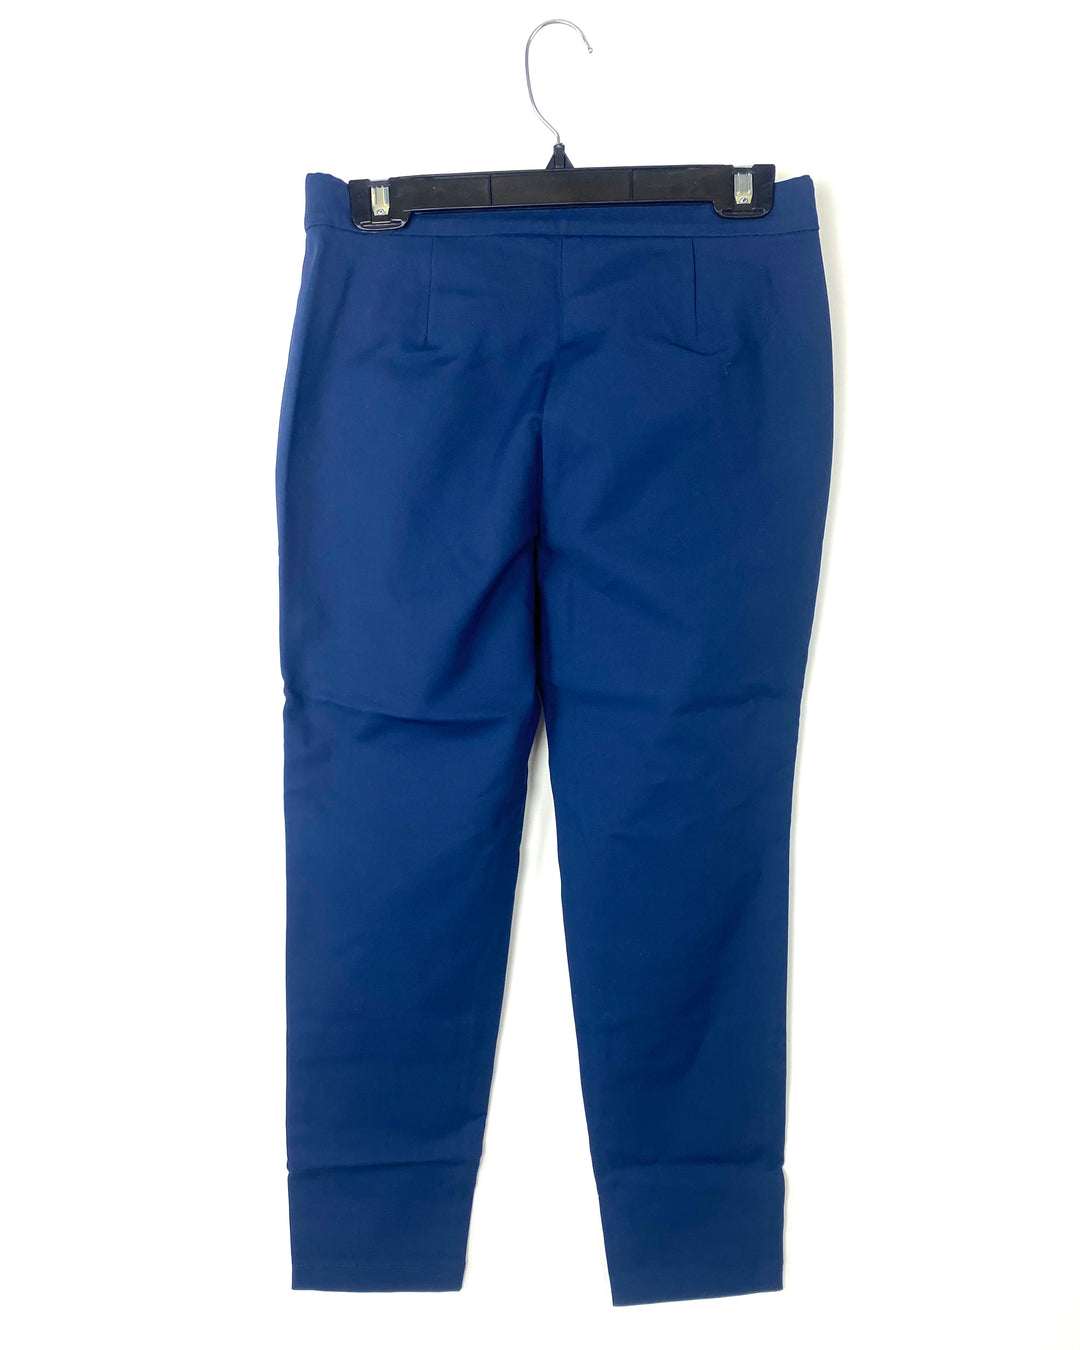 Navy Trousers - Size 2, 4, 6 and 8